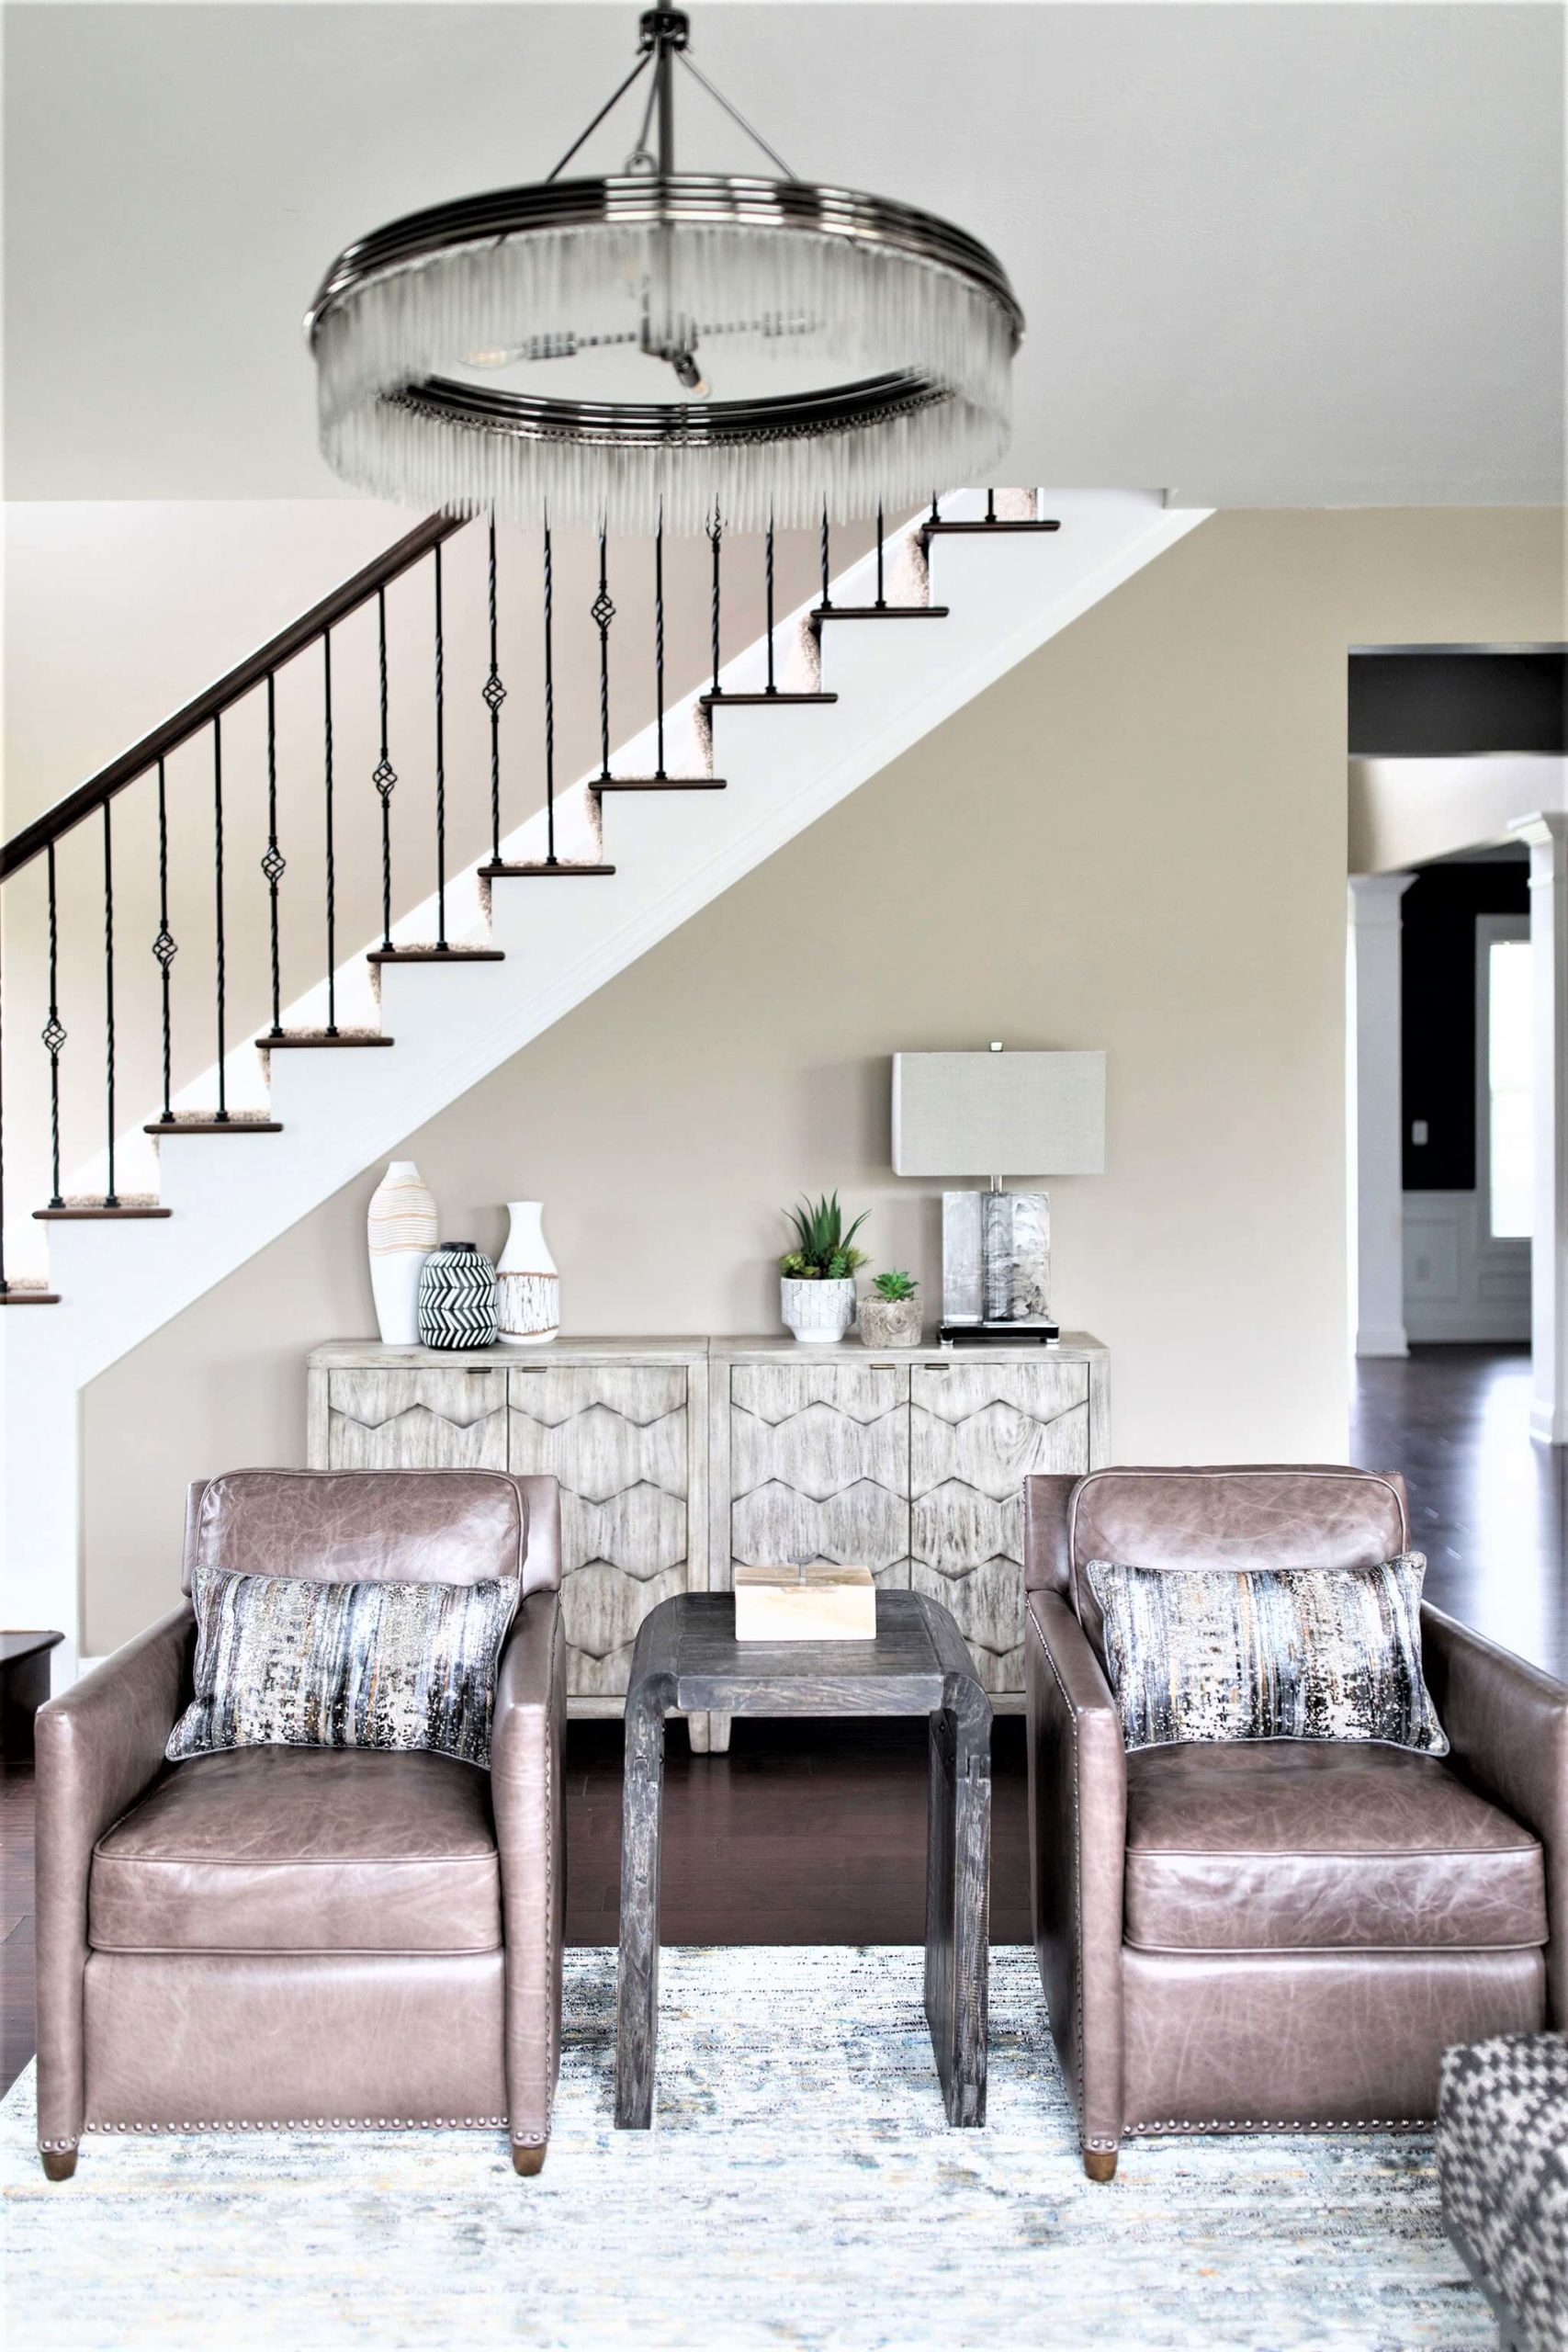 Moody Urban Home Stairway in Family Room Space